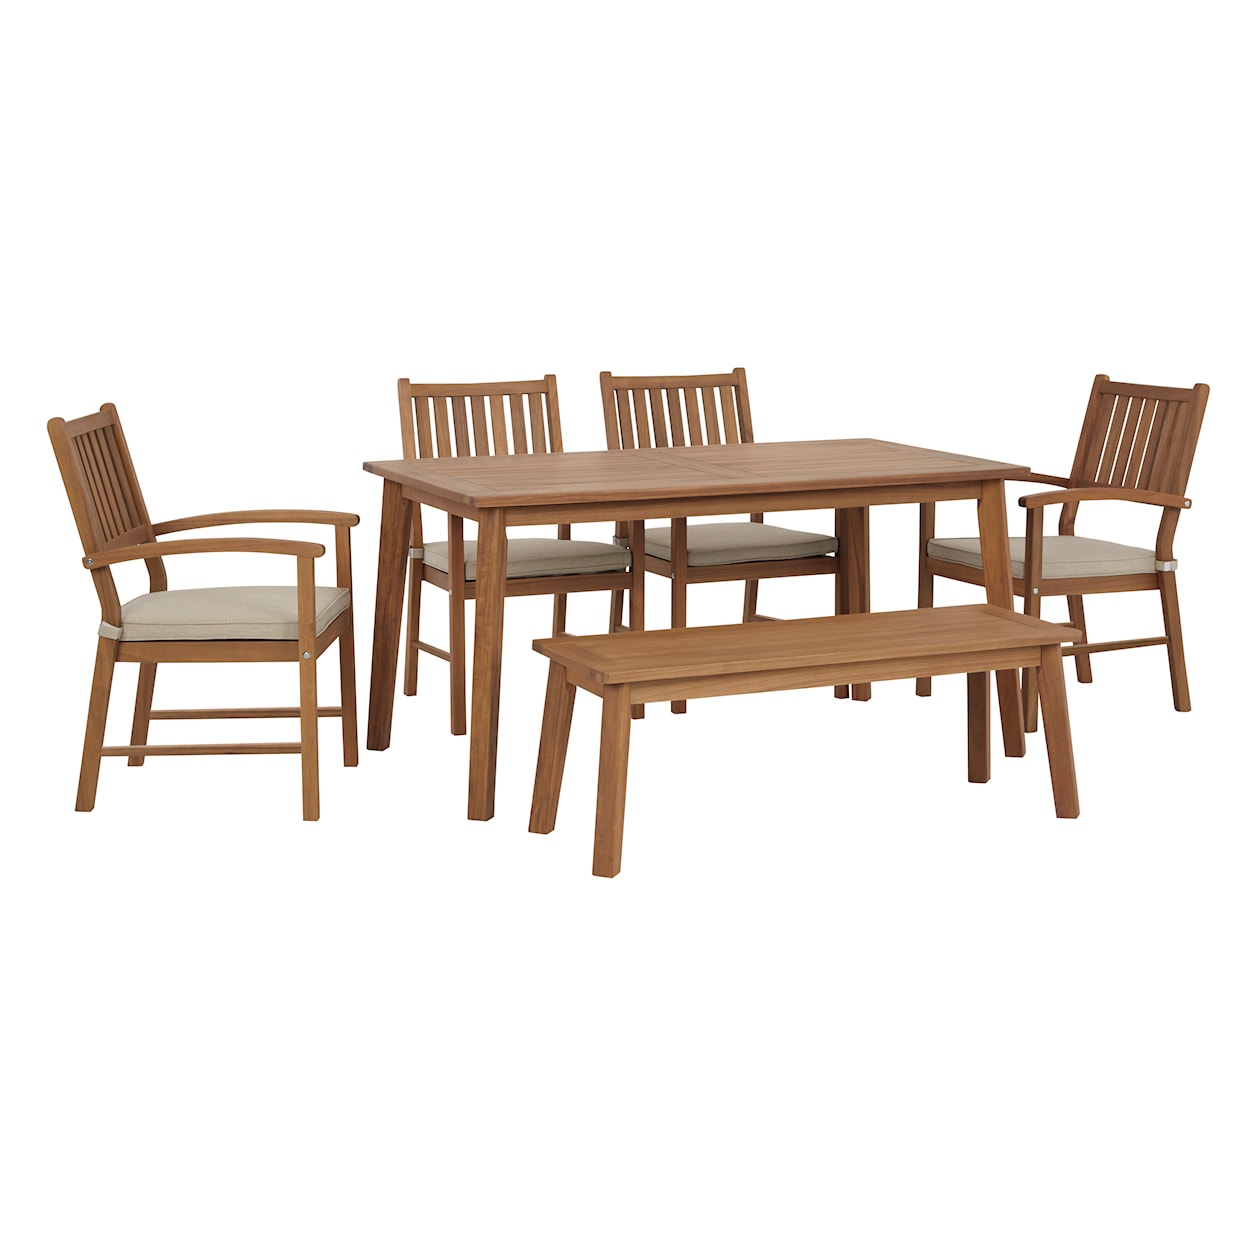 Michael Alan Select Janiyah Outdoor Dining Table w/ 4 Chairs & Bench